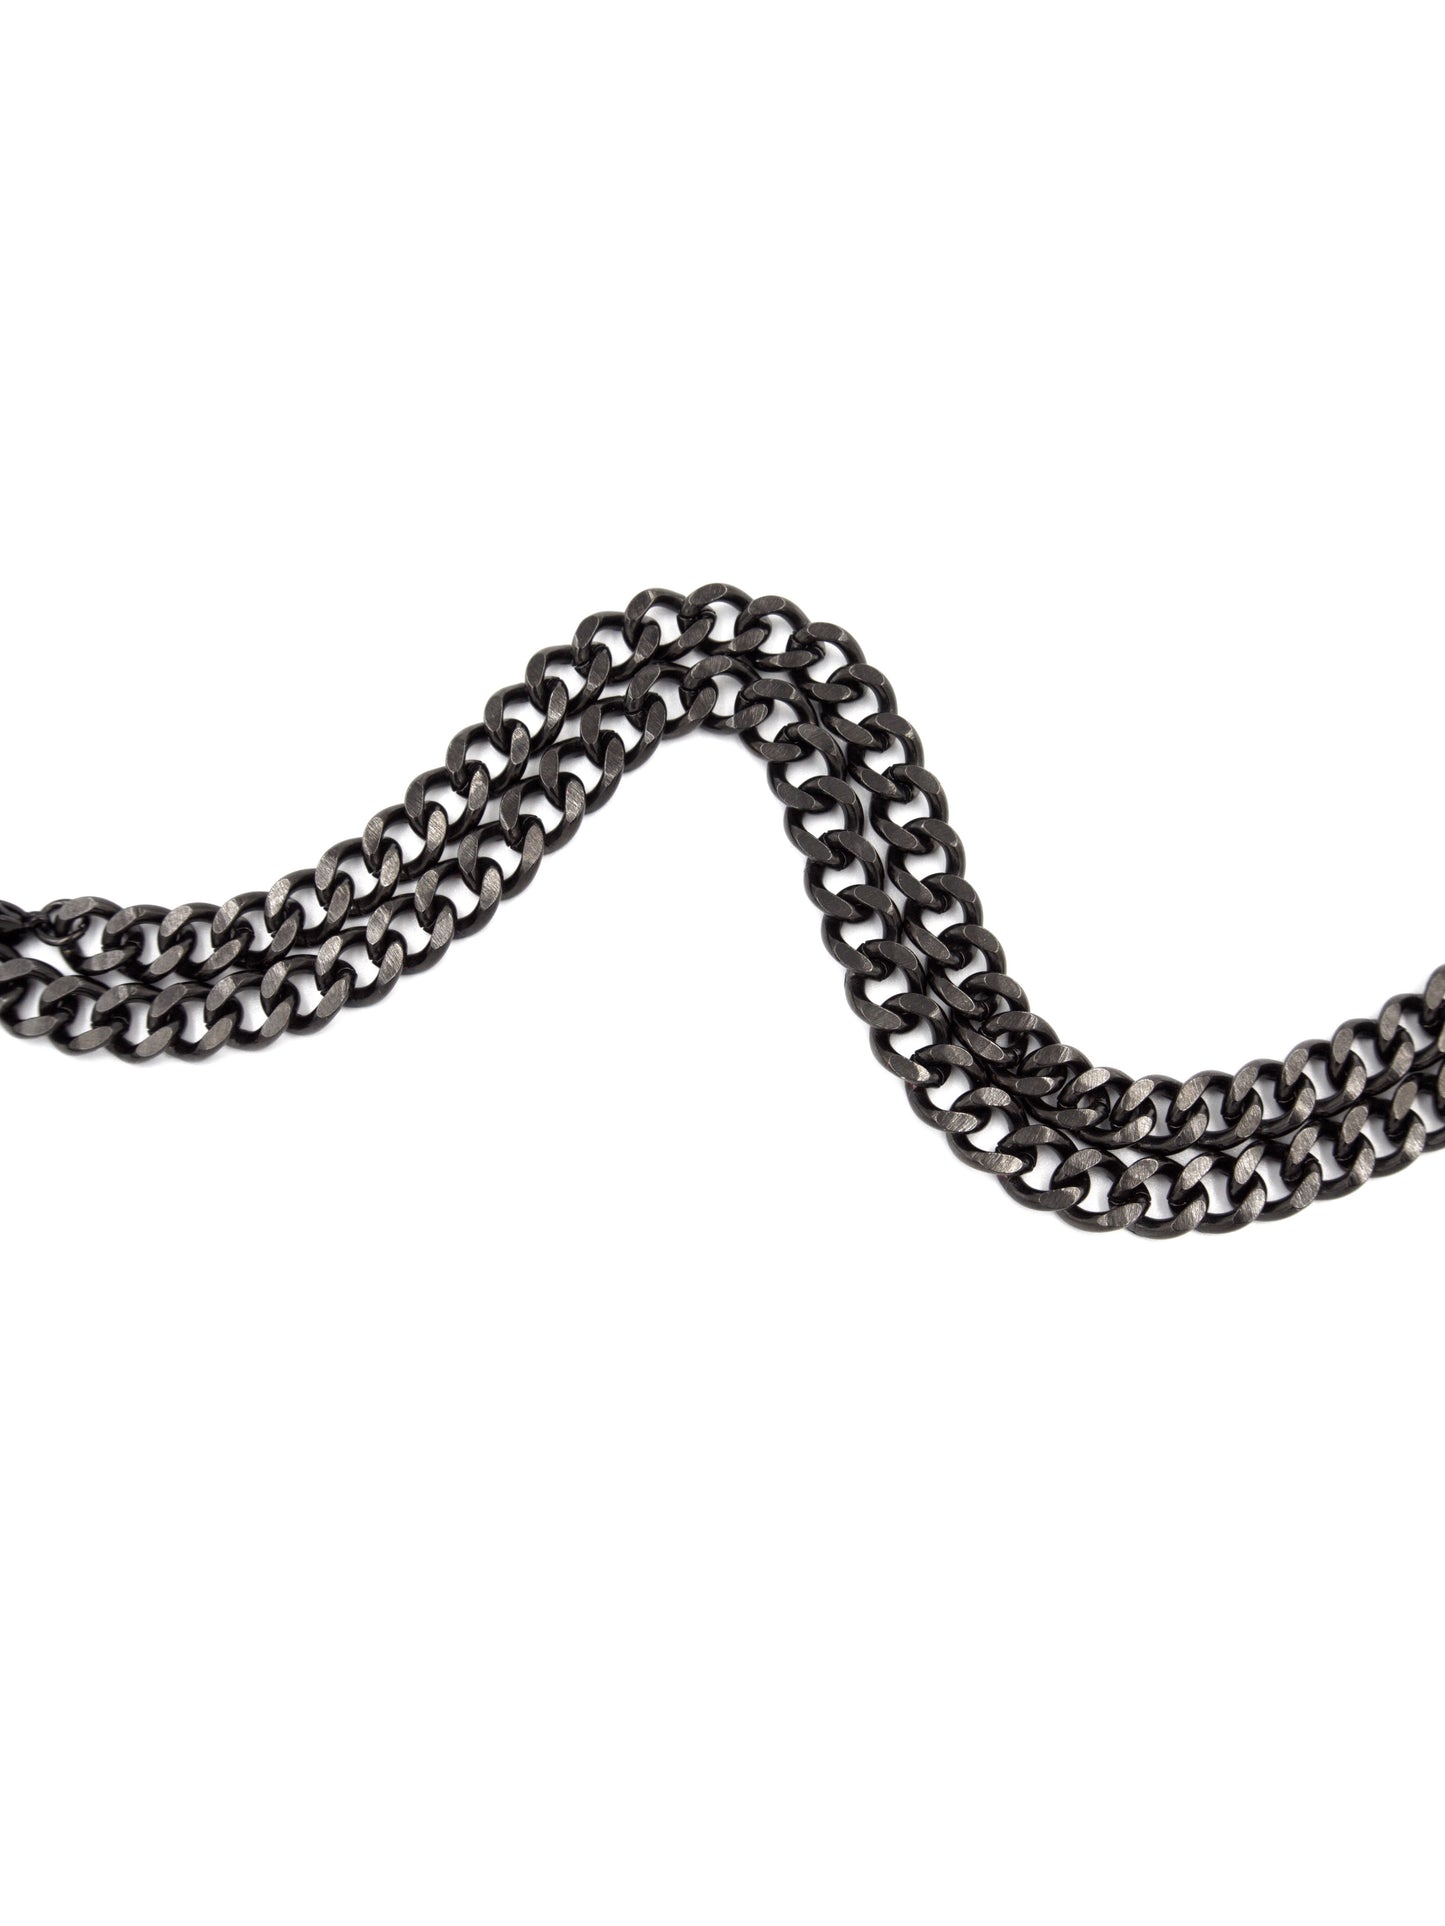 Basic 10mm Curb Chain Necklace